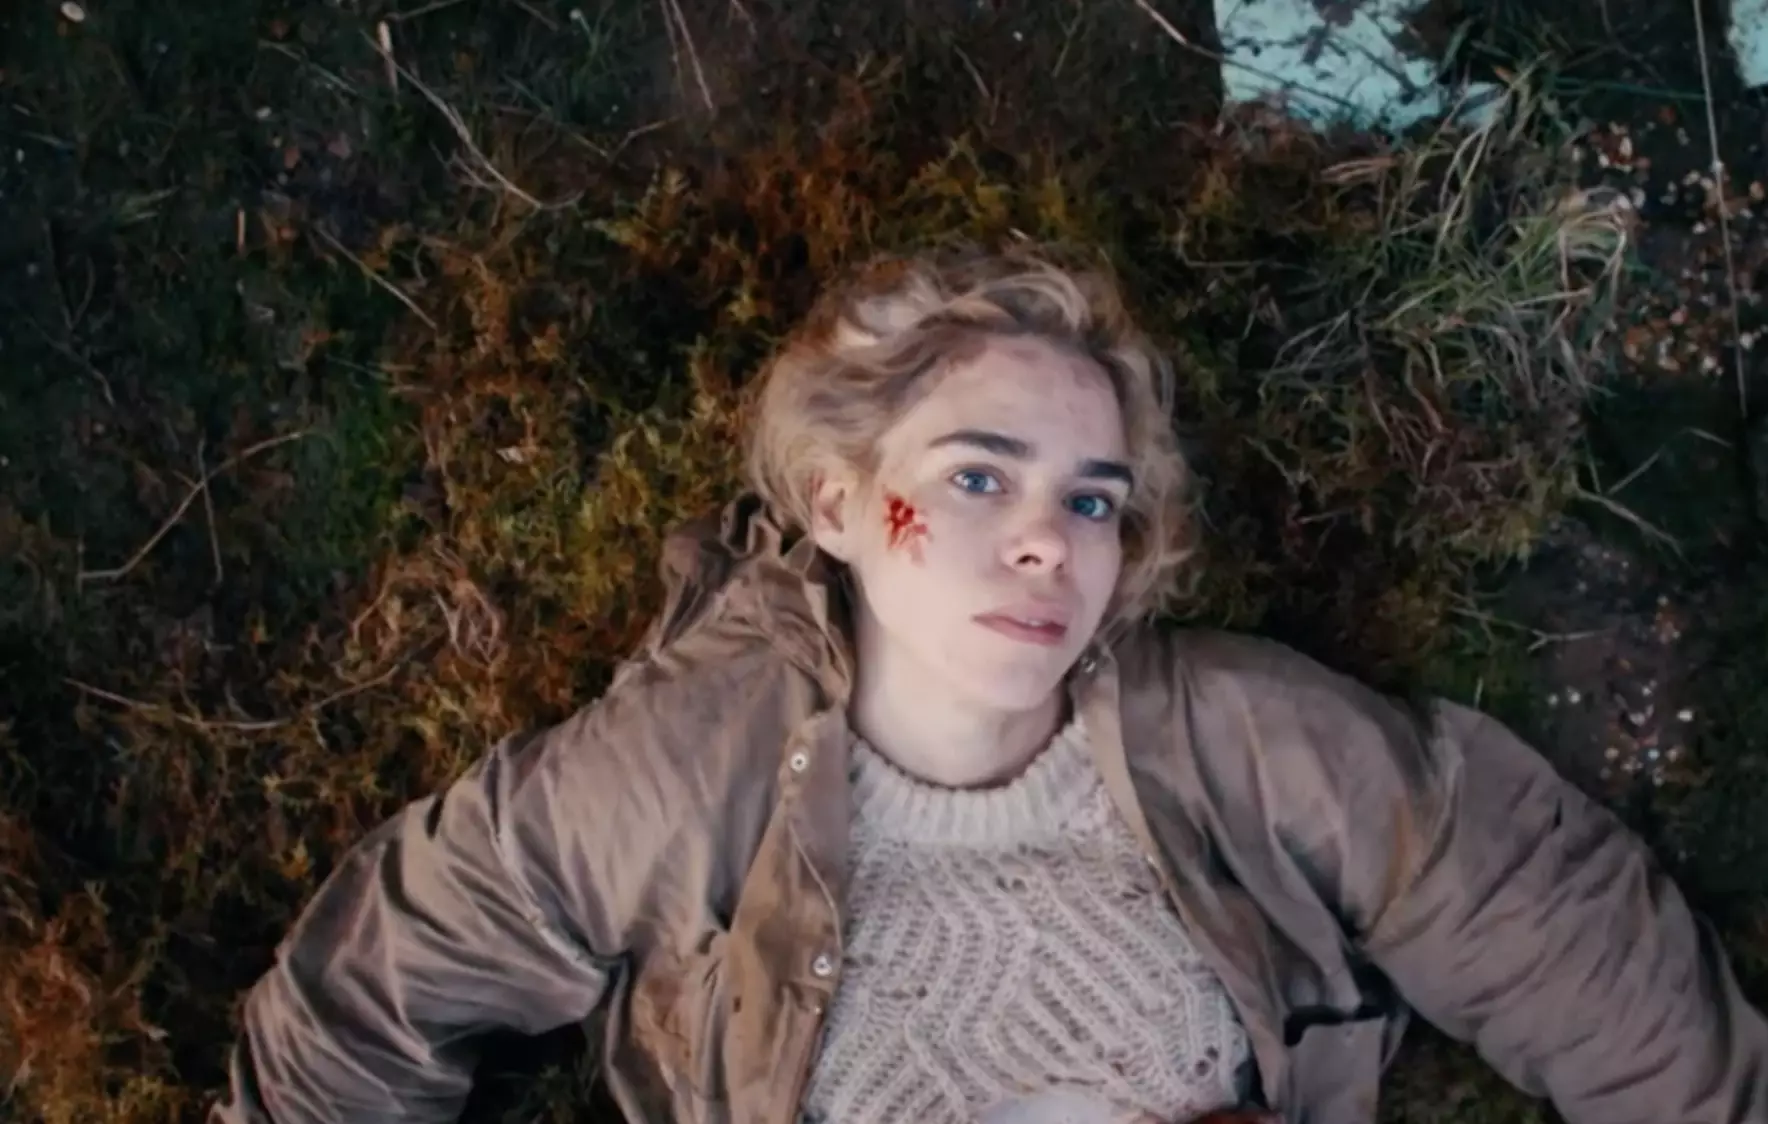 We see Suzie laying bloody in a field in the disturbing trailer (